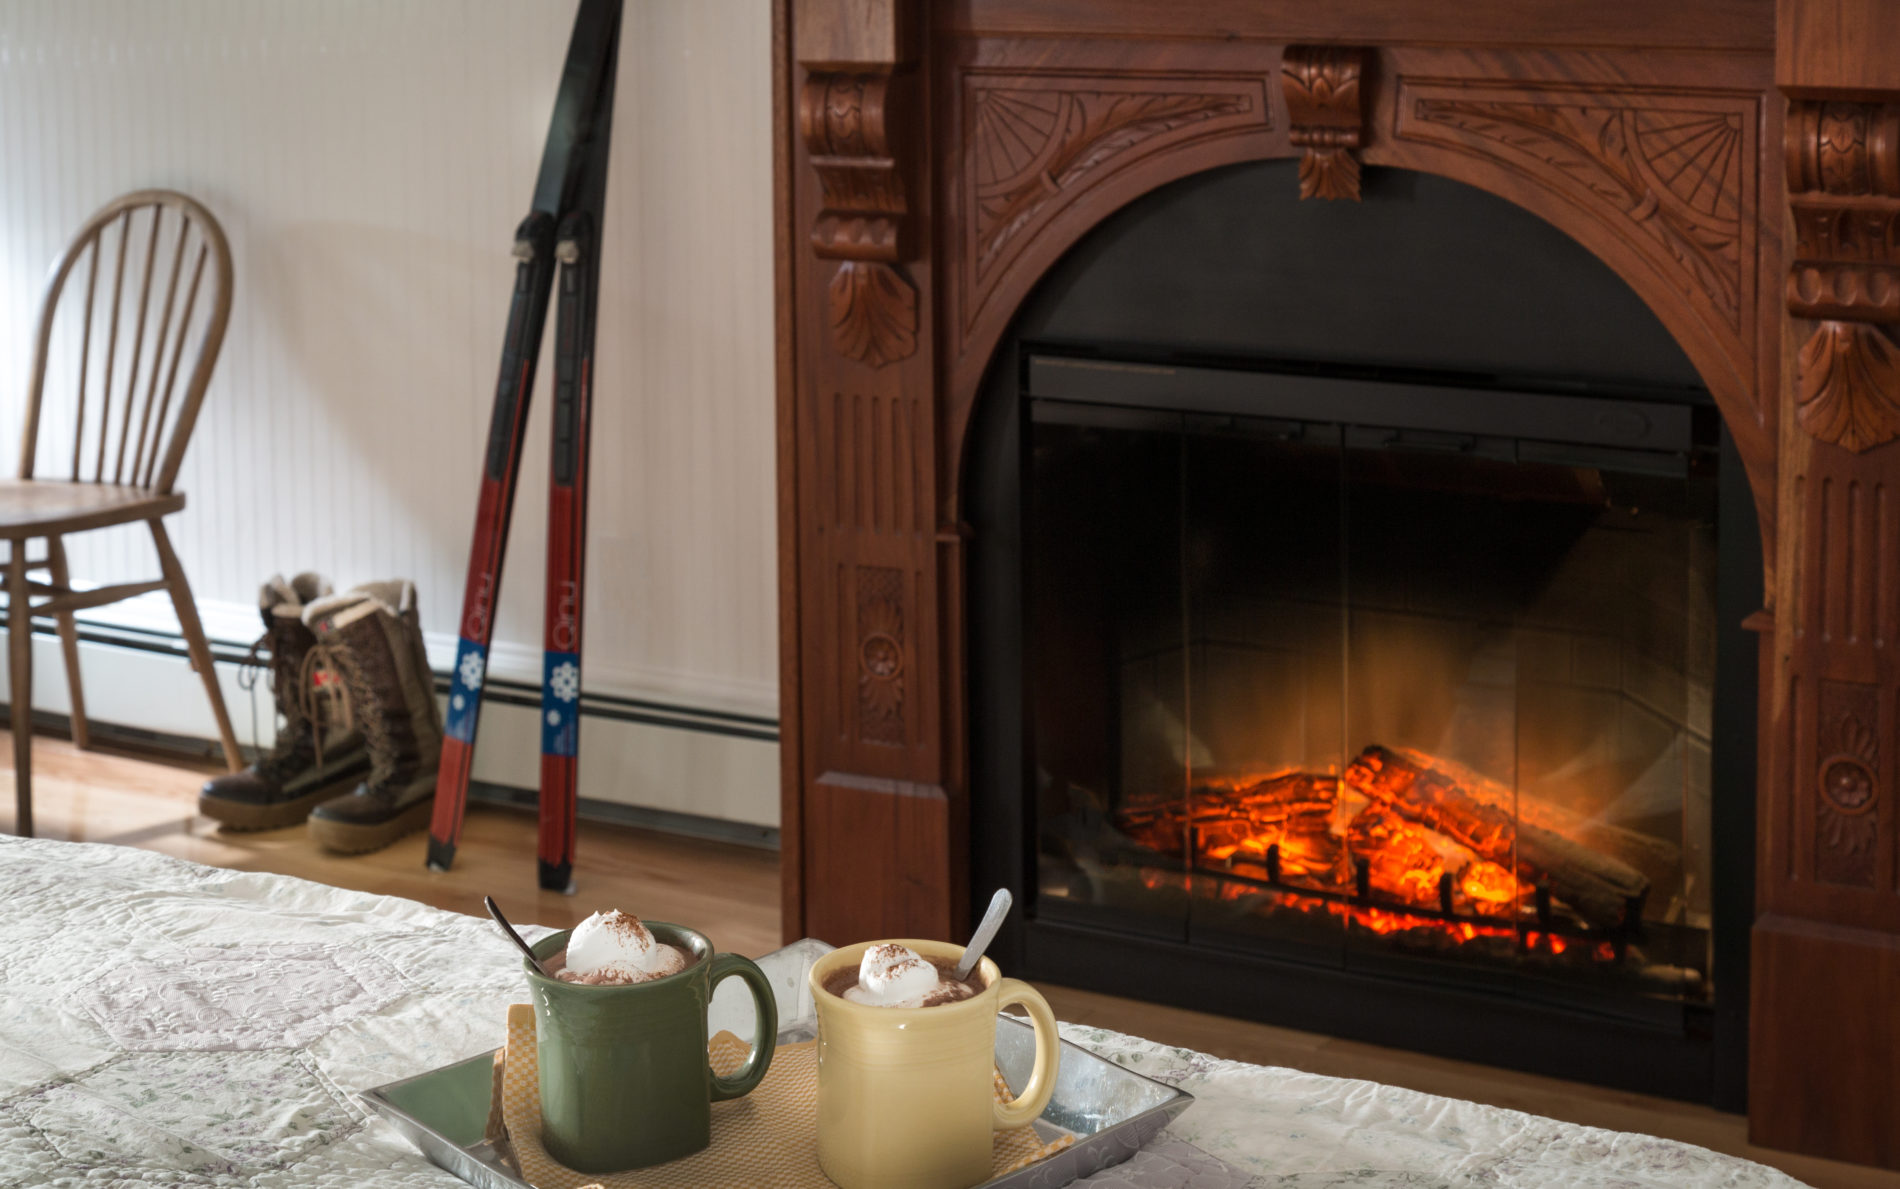 a tray on a bed with two mugs of hot cocoa, a fireplace in teh background with orange flames and a pair cross country skis leaning against the white wall.